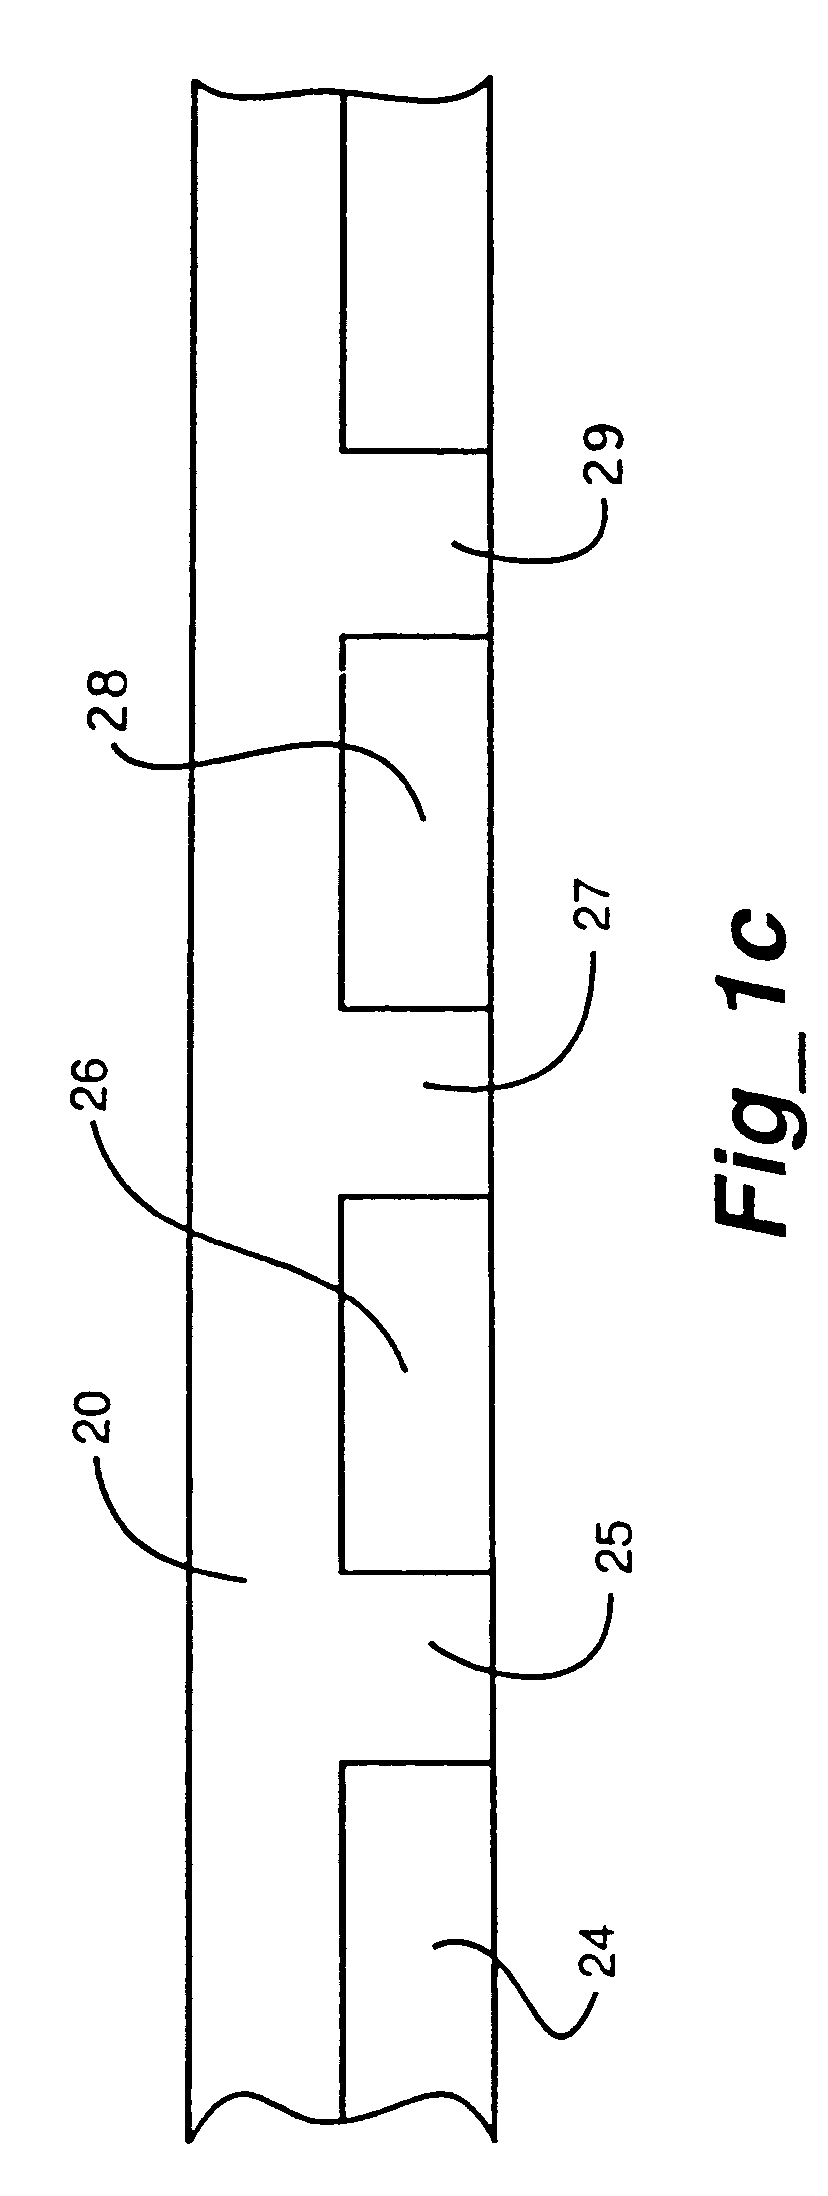 Apparatus and methods for maskless pattern generation